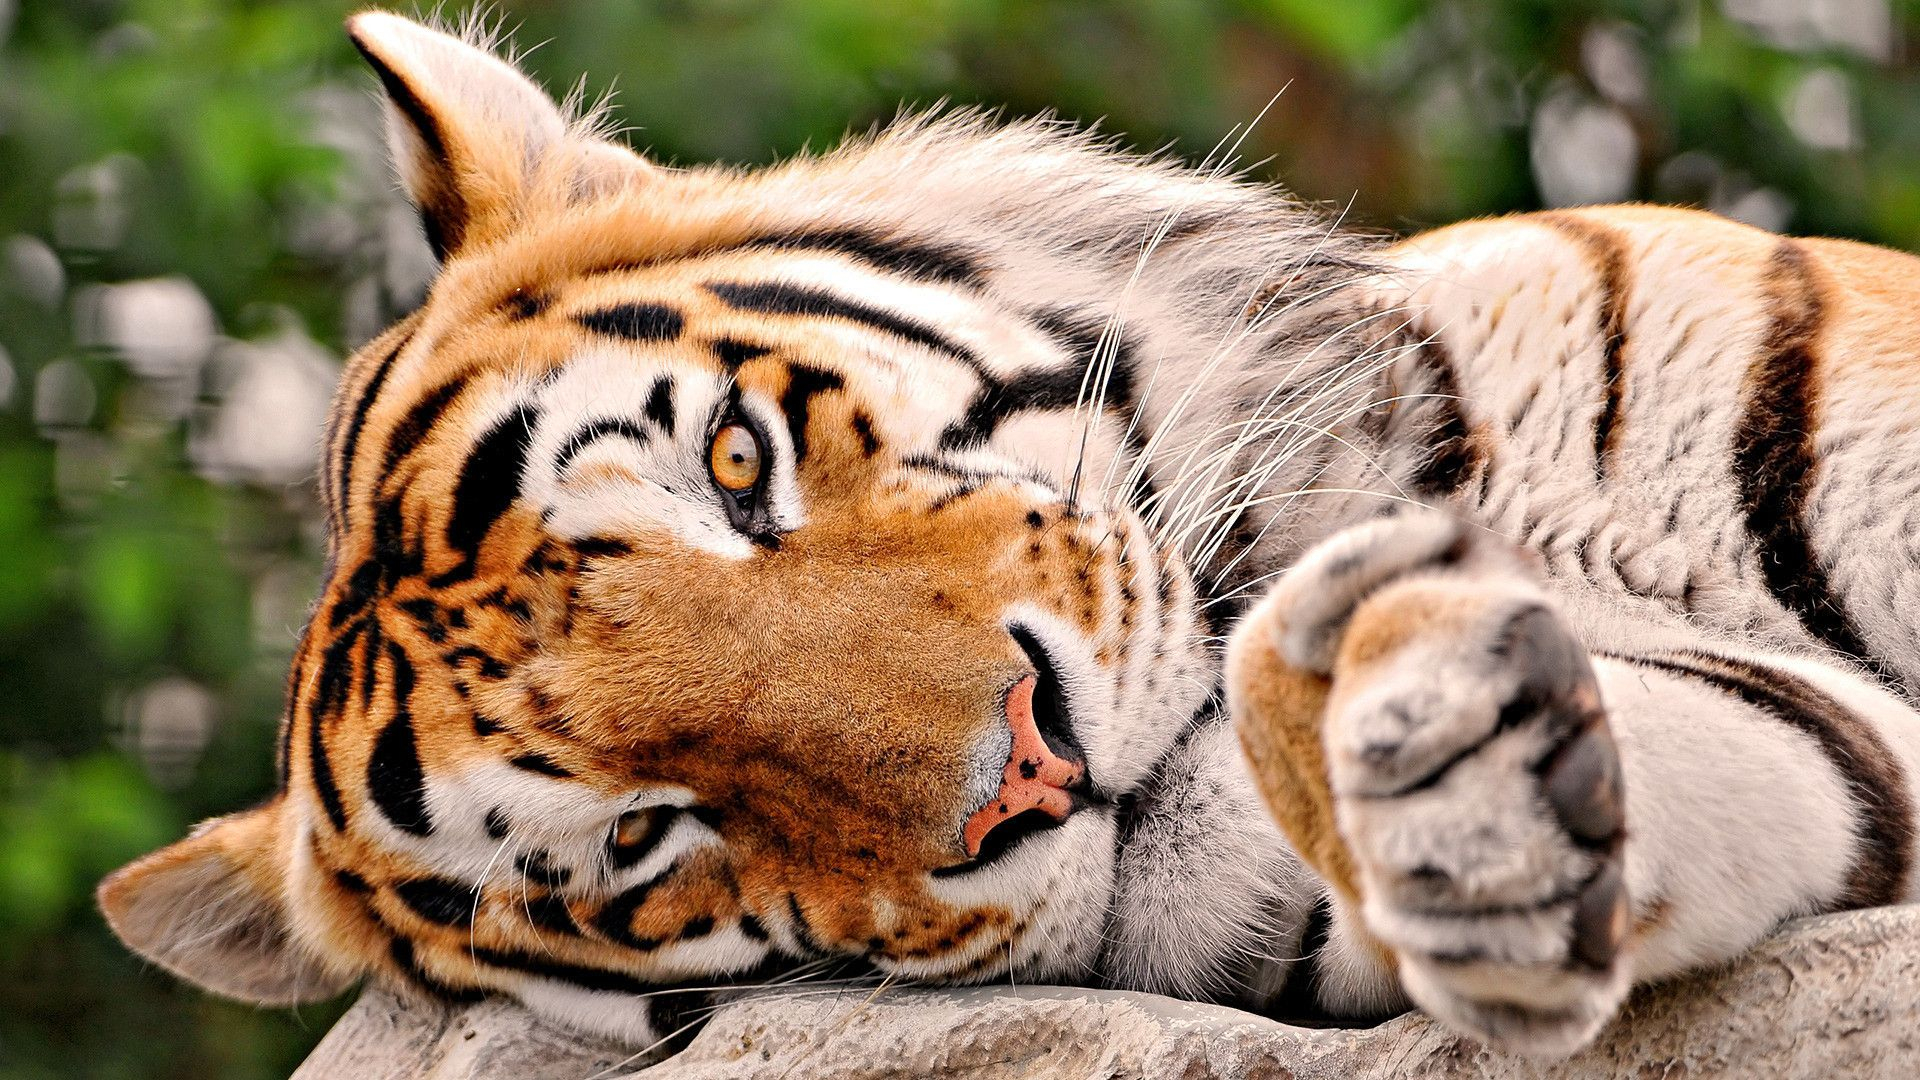 1920x1080 Wild Cats Wallpapers | Tiger pictures, Beautiful cat images, Tiger